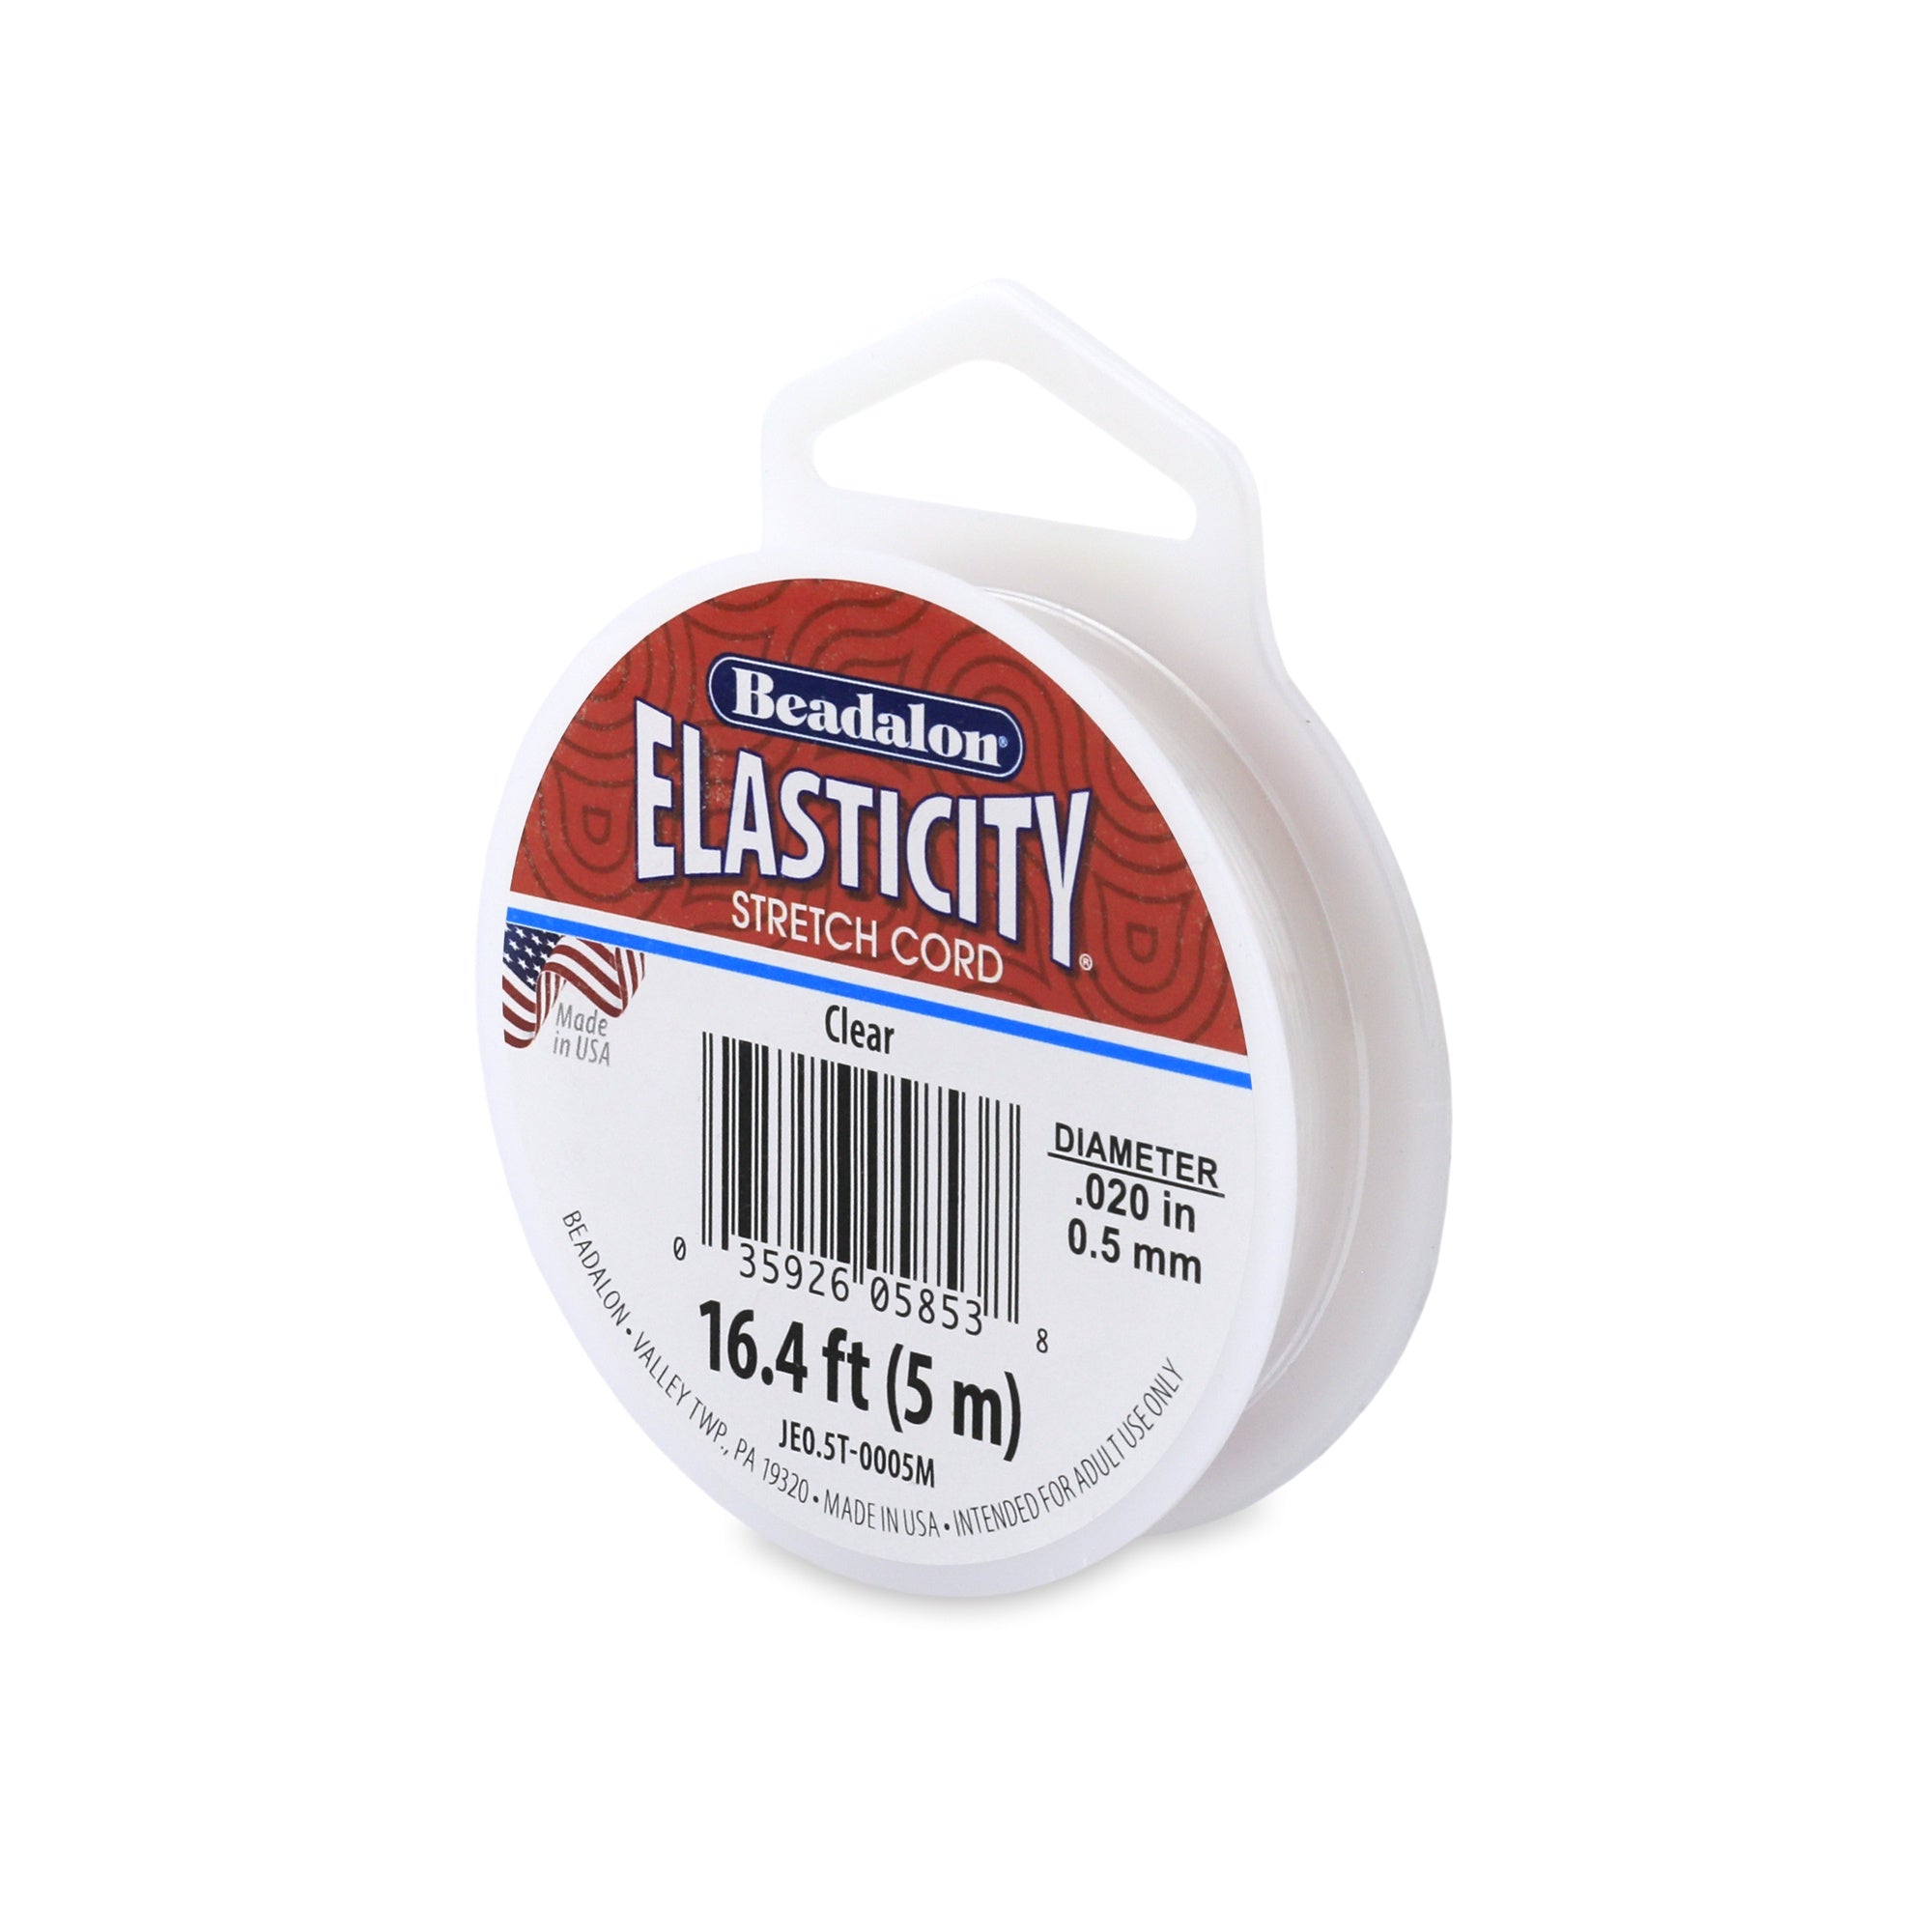 Elasticity Stretch Cord, 0.5 mm / .020 in, Clear, 5 meter